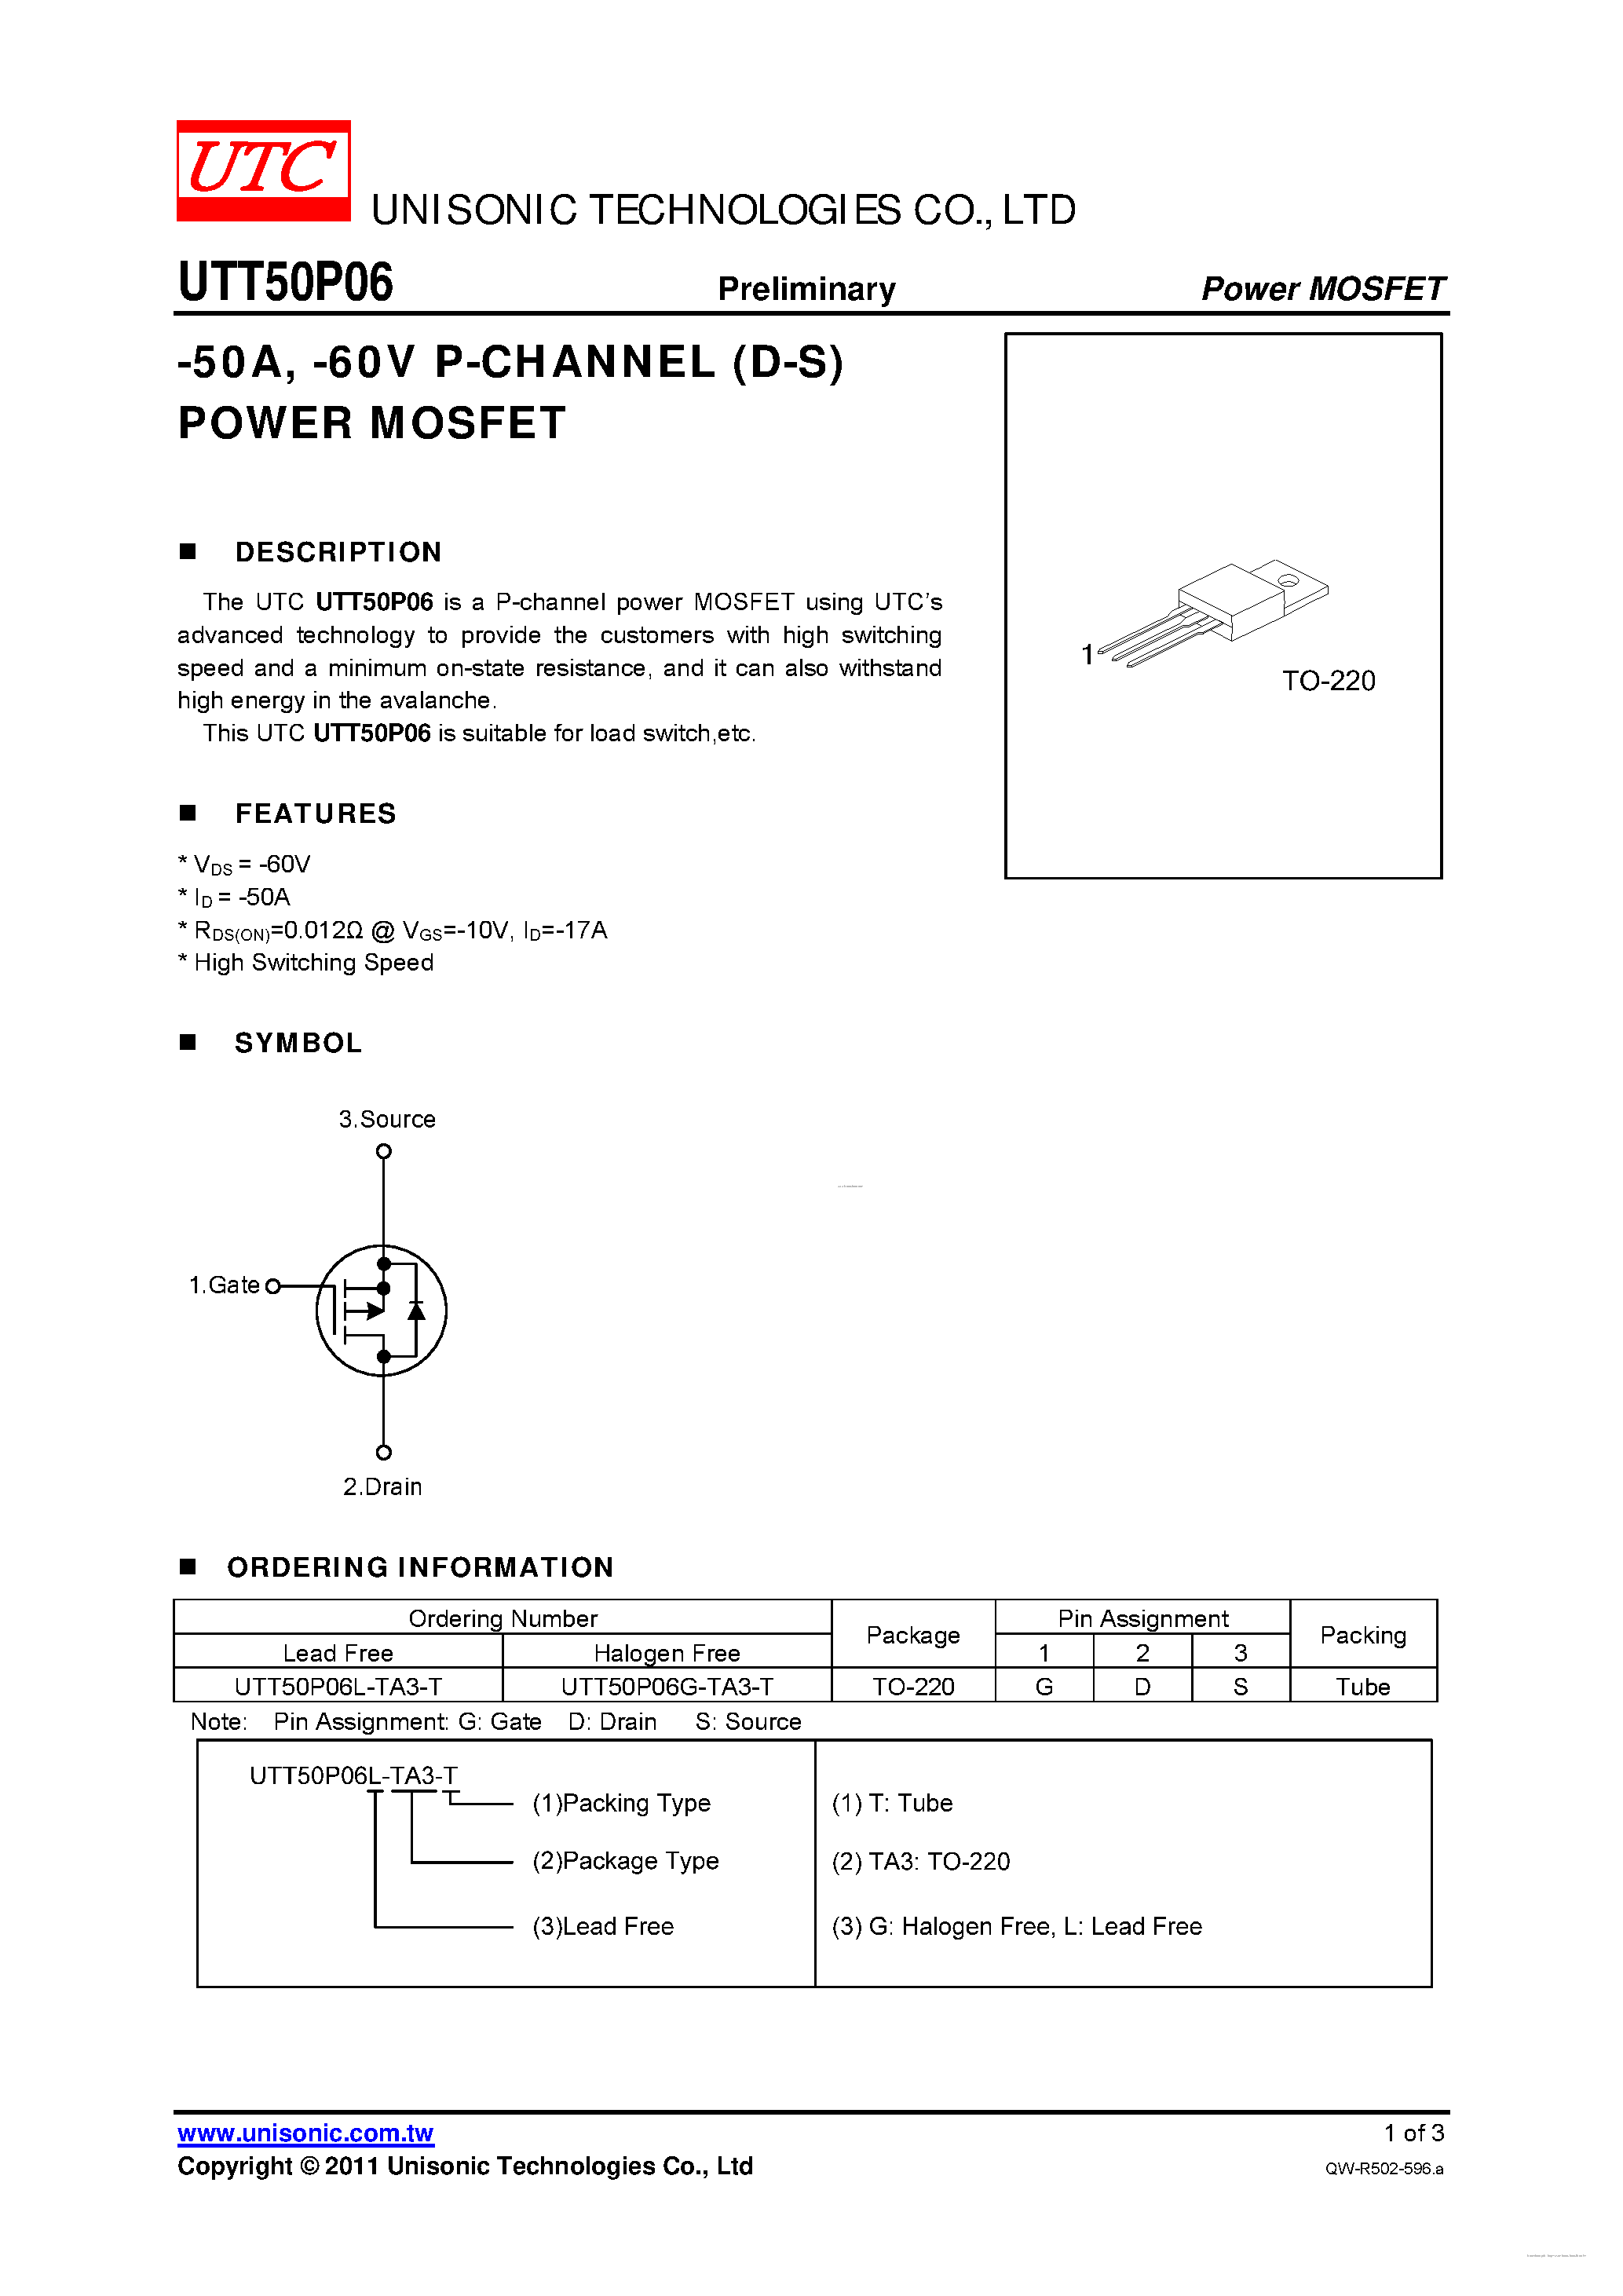 Datasheet UTT50P06 - P-CHANNEL POWER MOSFET page 1